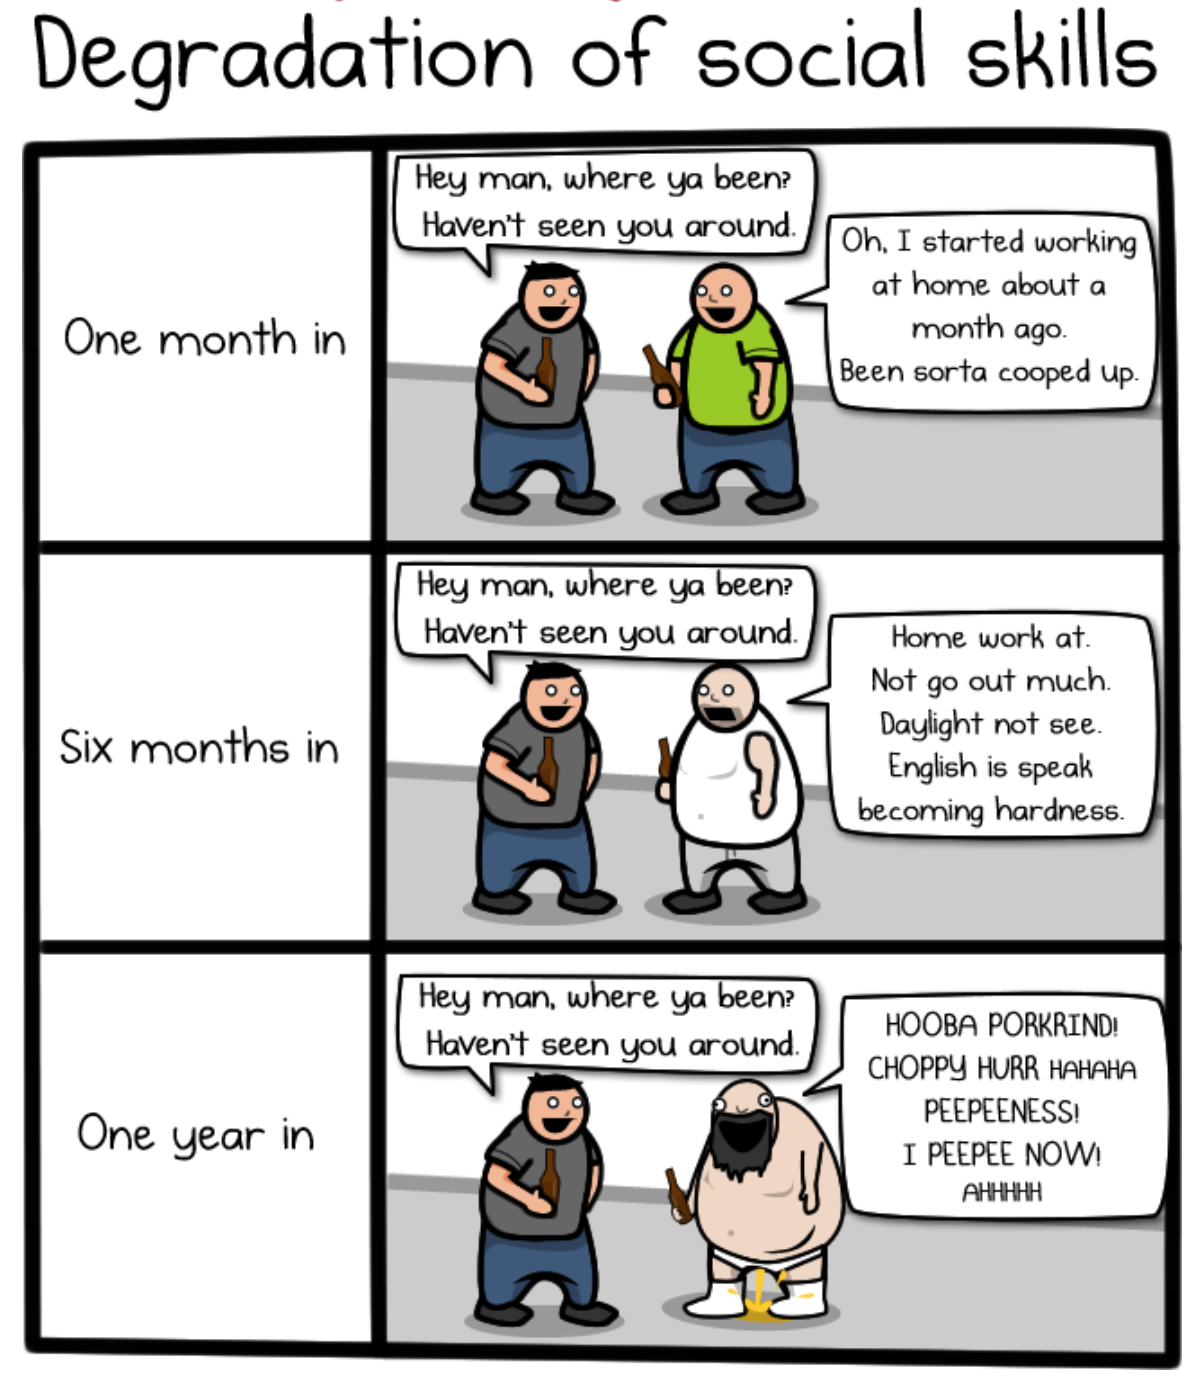 Oatmeal comics on remote workers